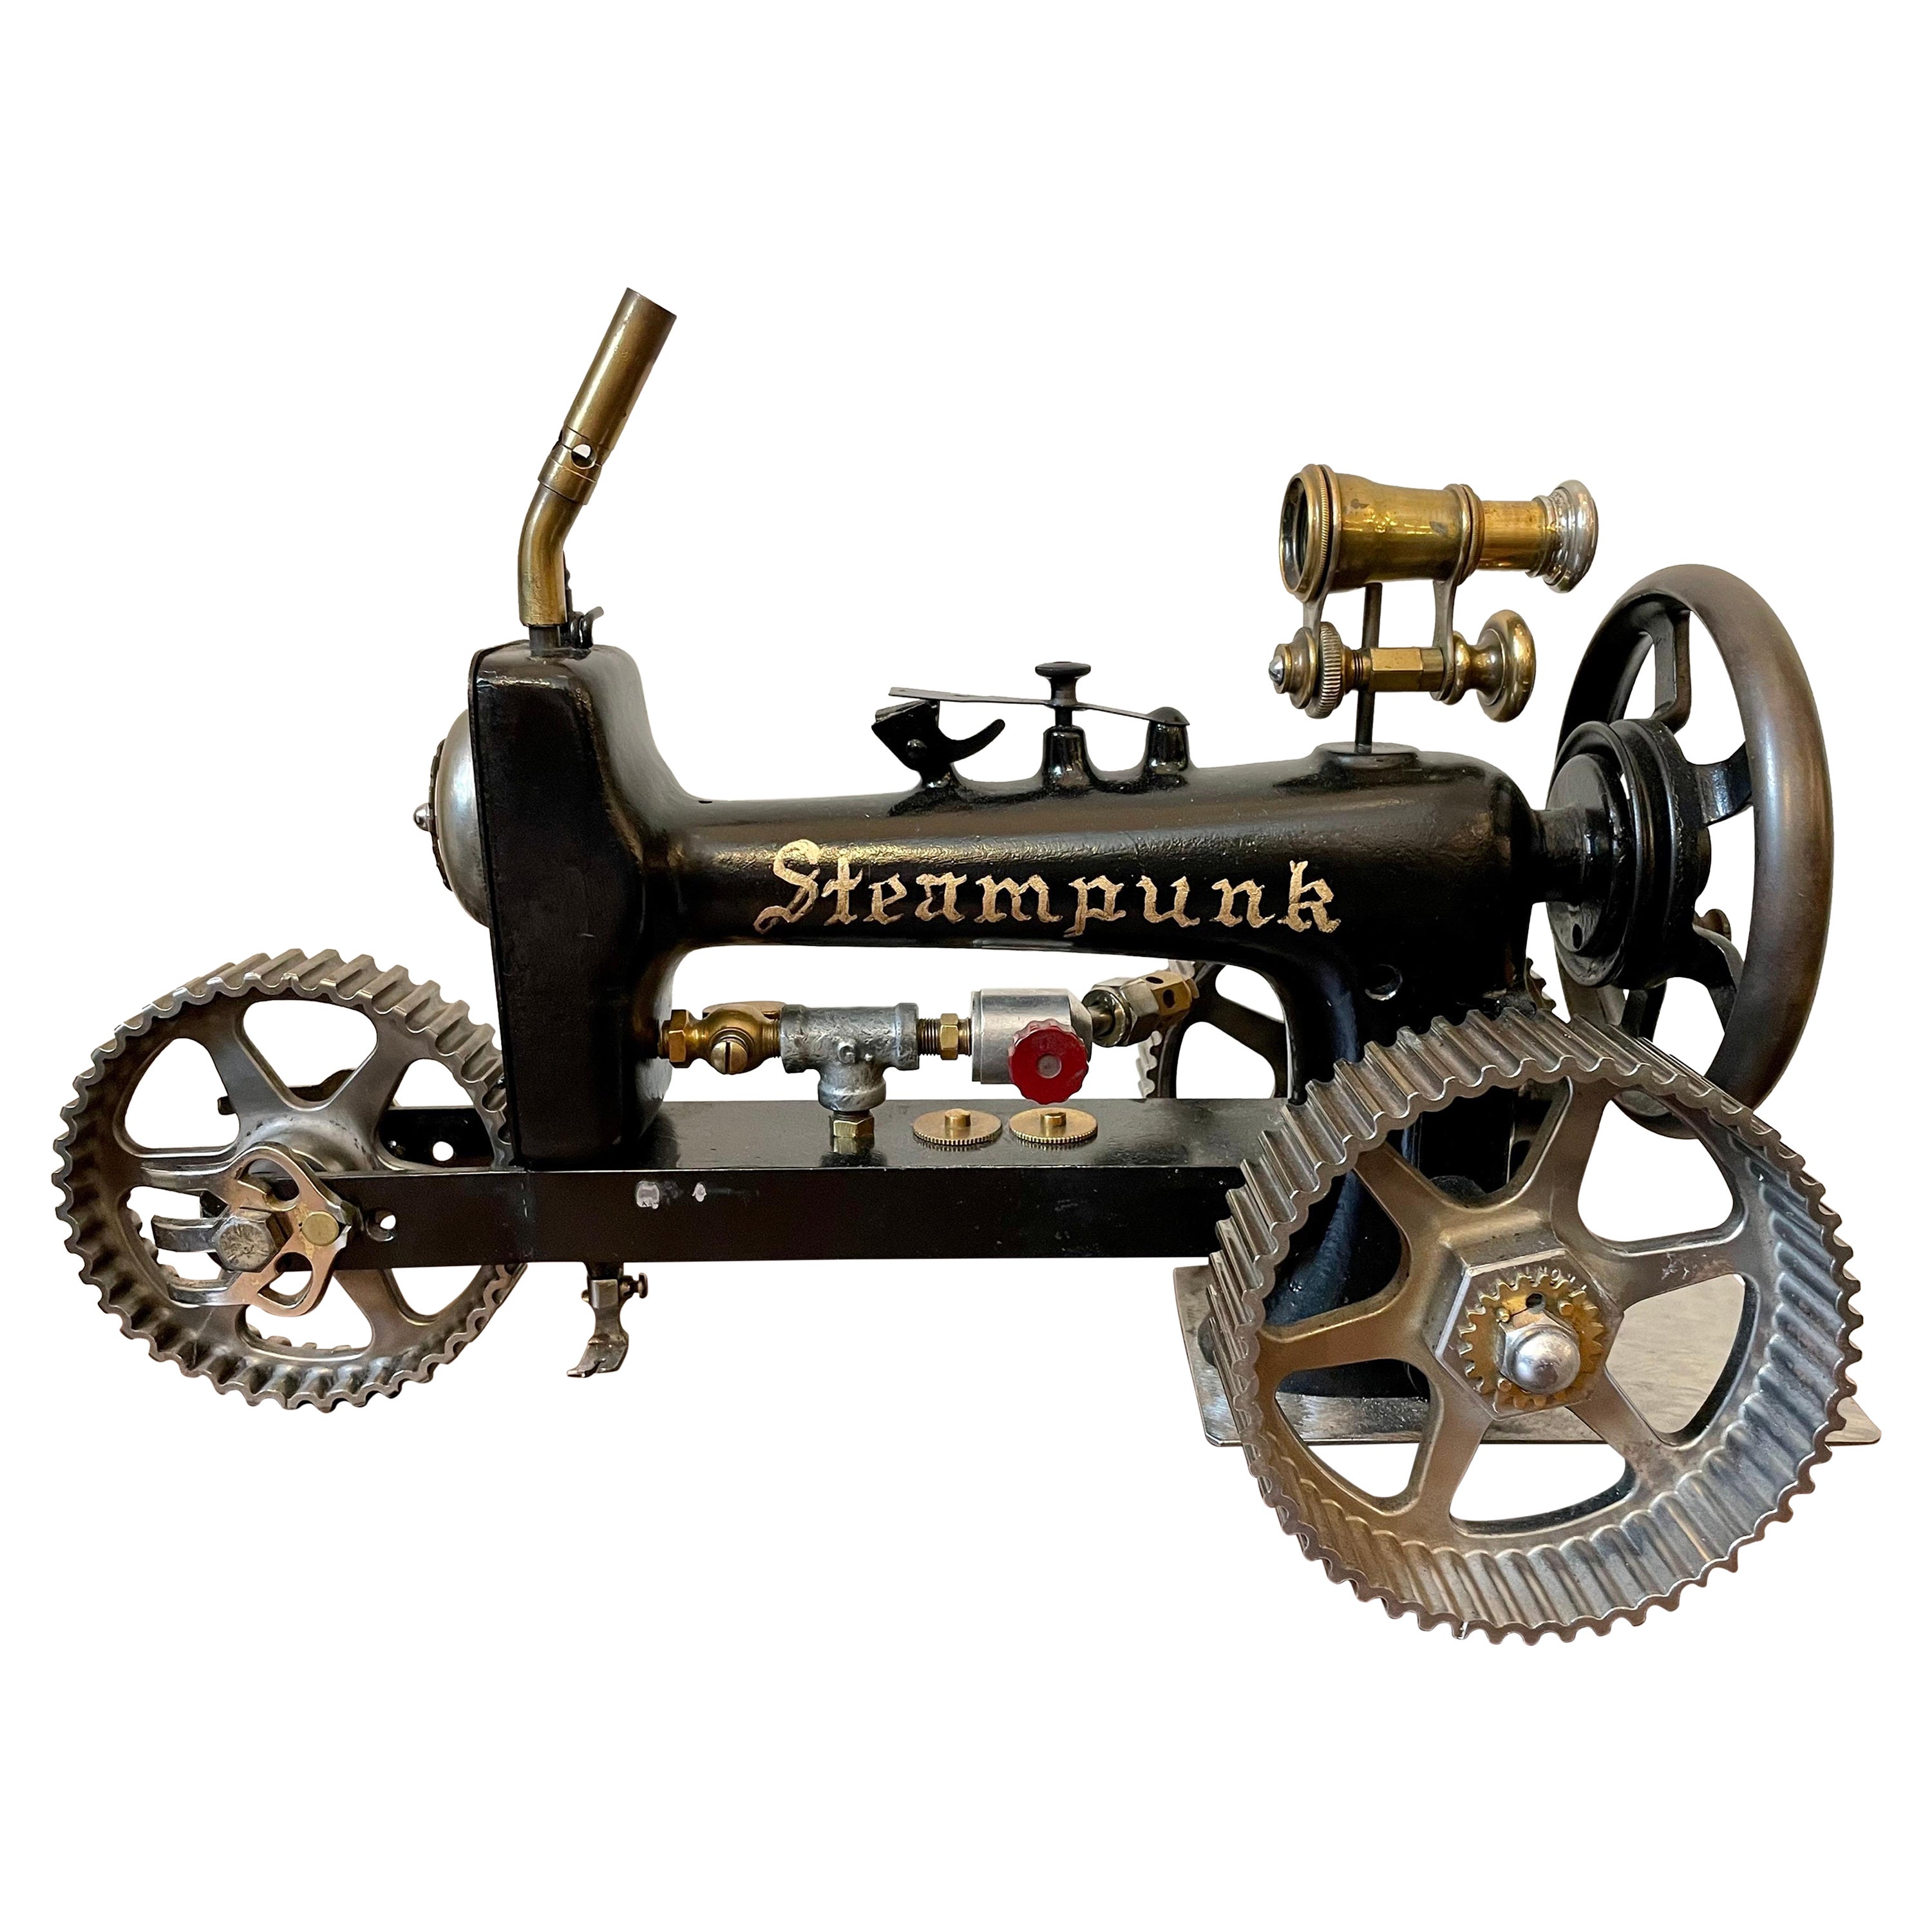 Whimsically Crafted "Steampunk" Sewing Machine Tractor Sculpture For Sale